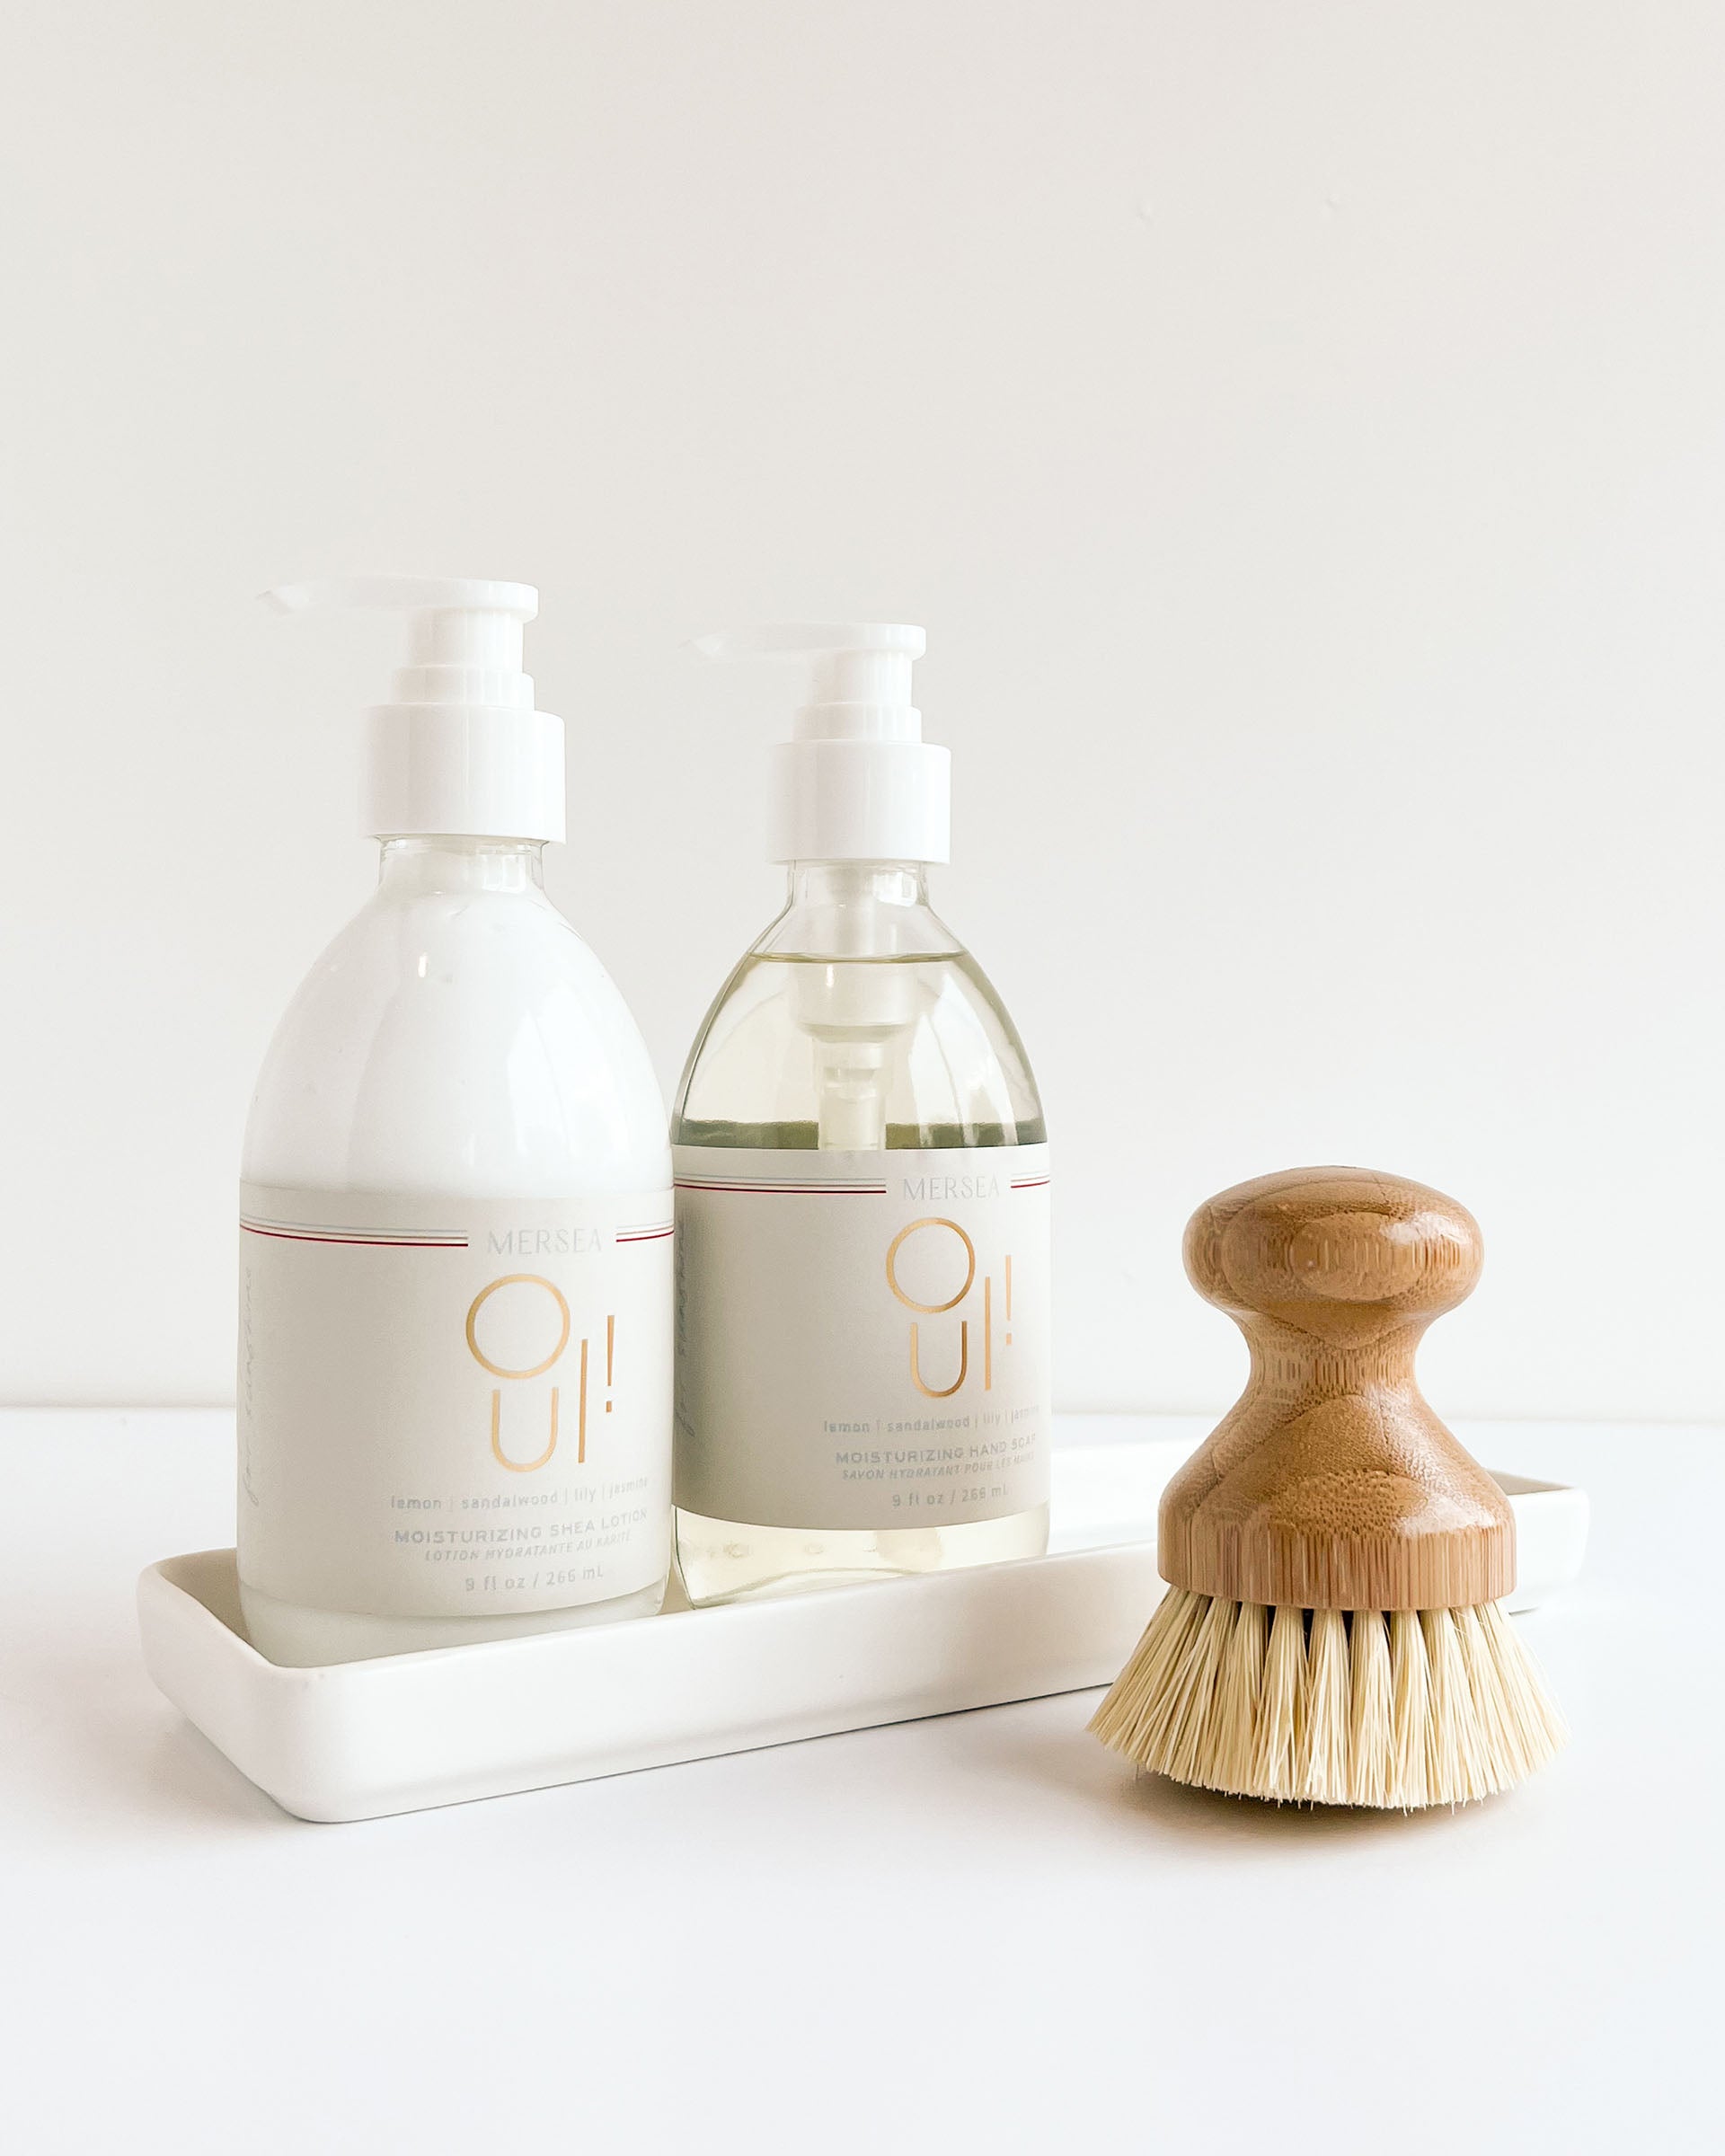 mersea oui shea lotion and handsoap set with brush